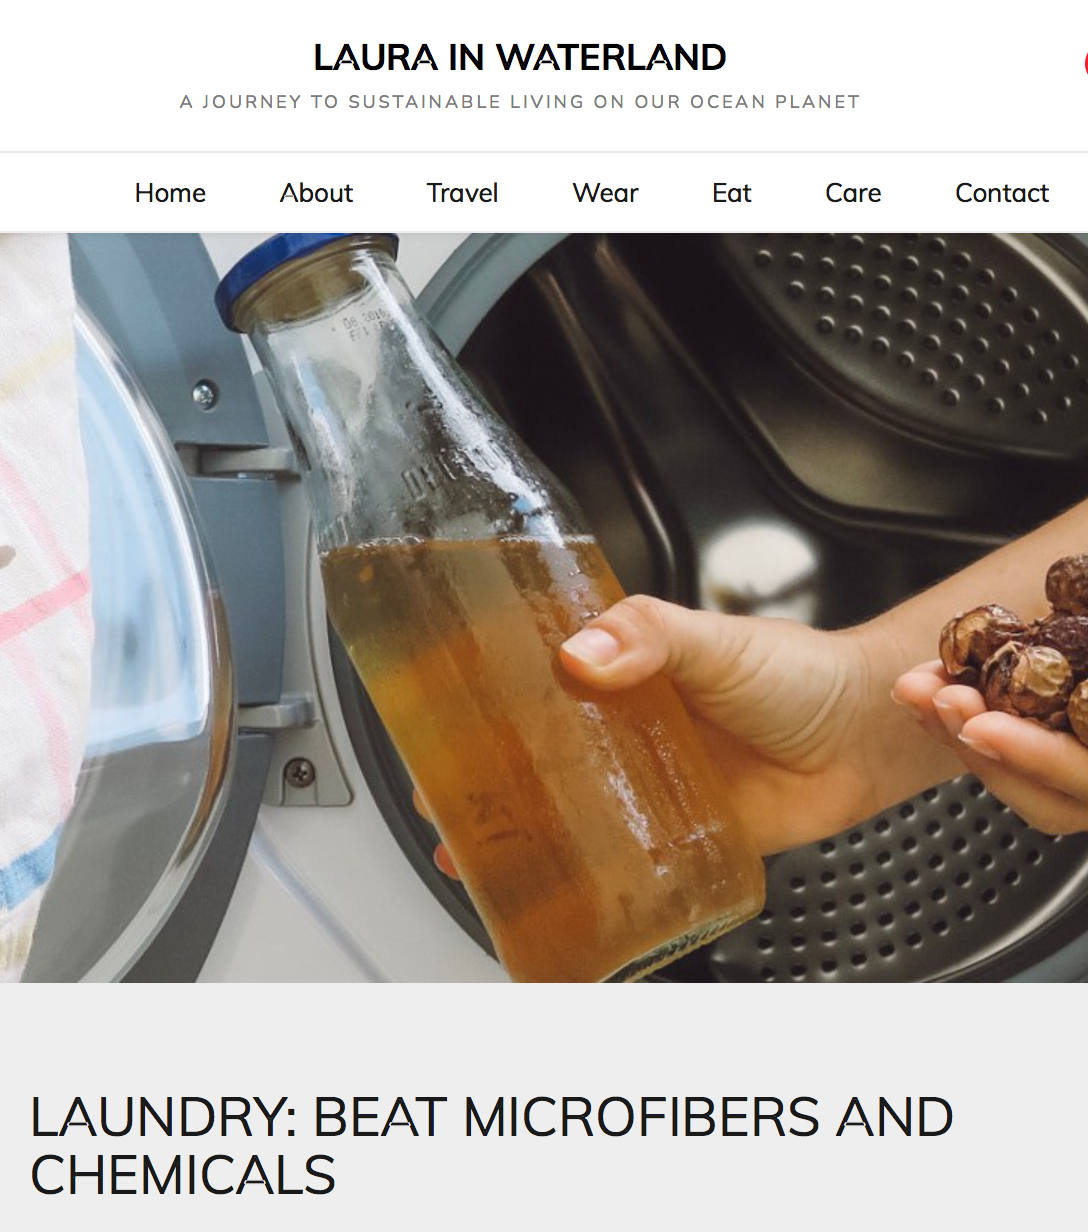 Laundry: Beat microfibers and chemicals